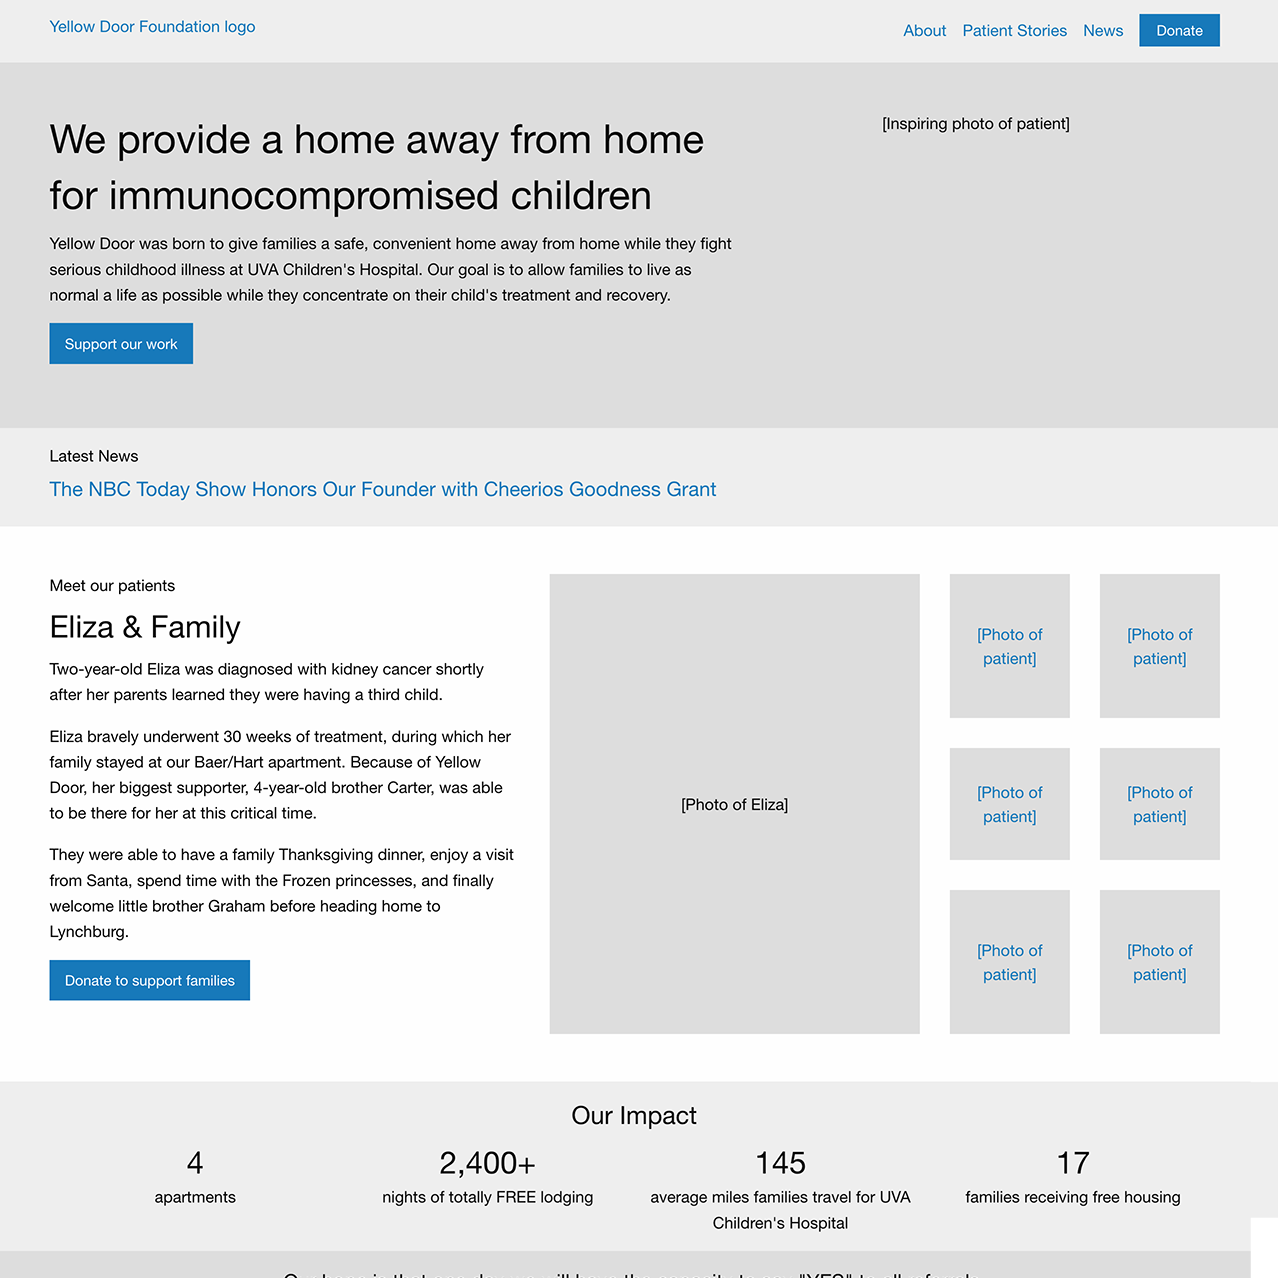 Wireframe for homepage